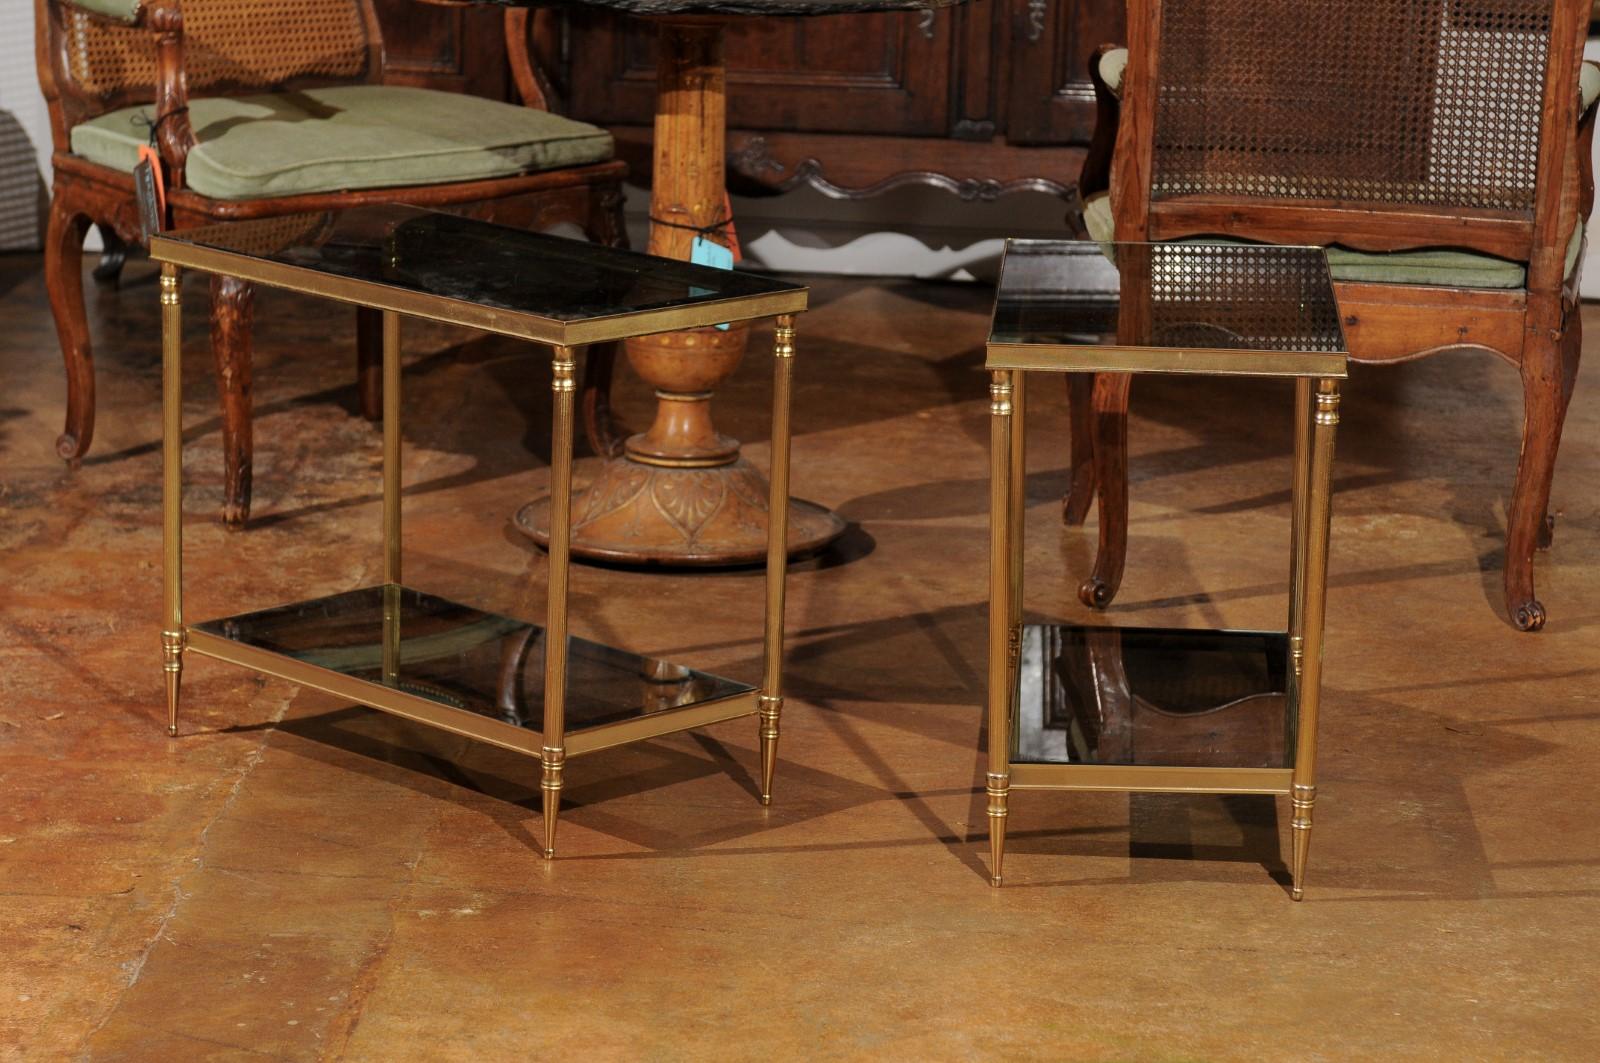 A pair of French vintage brass and glass side tables from the mid-20th century, with lower shelf. Born in France during the midcentury period, each of this pair of French side tables features a rectangular glass top, resting on a brass frame. A